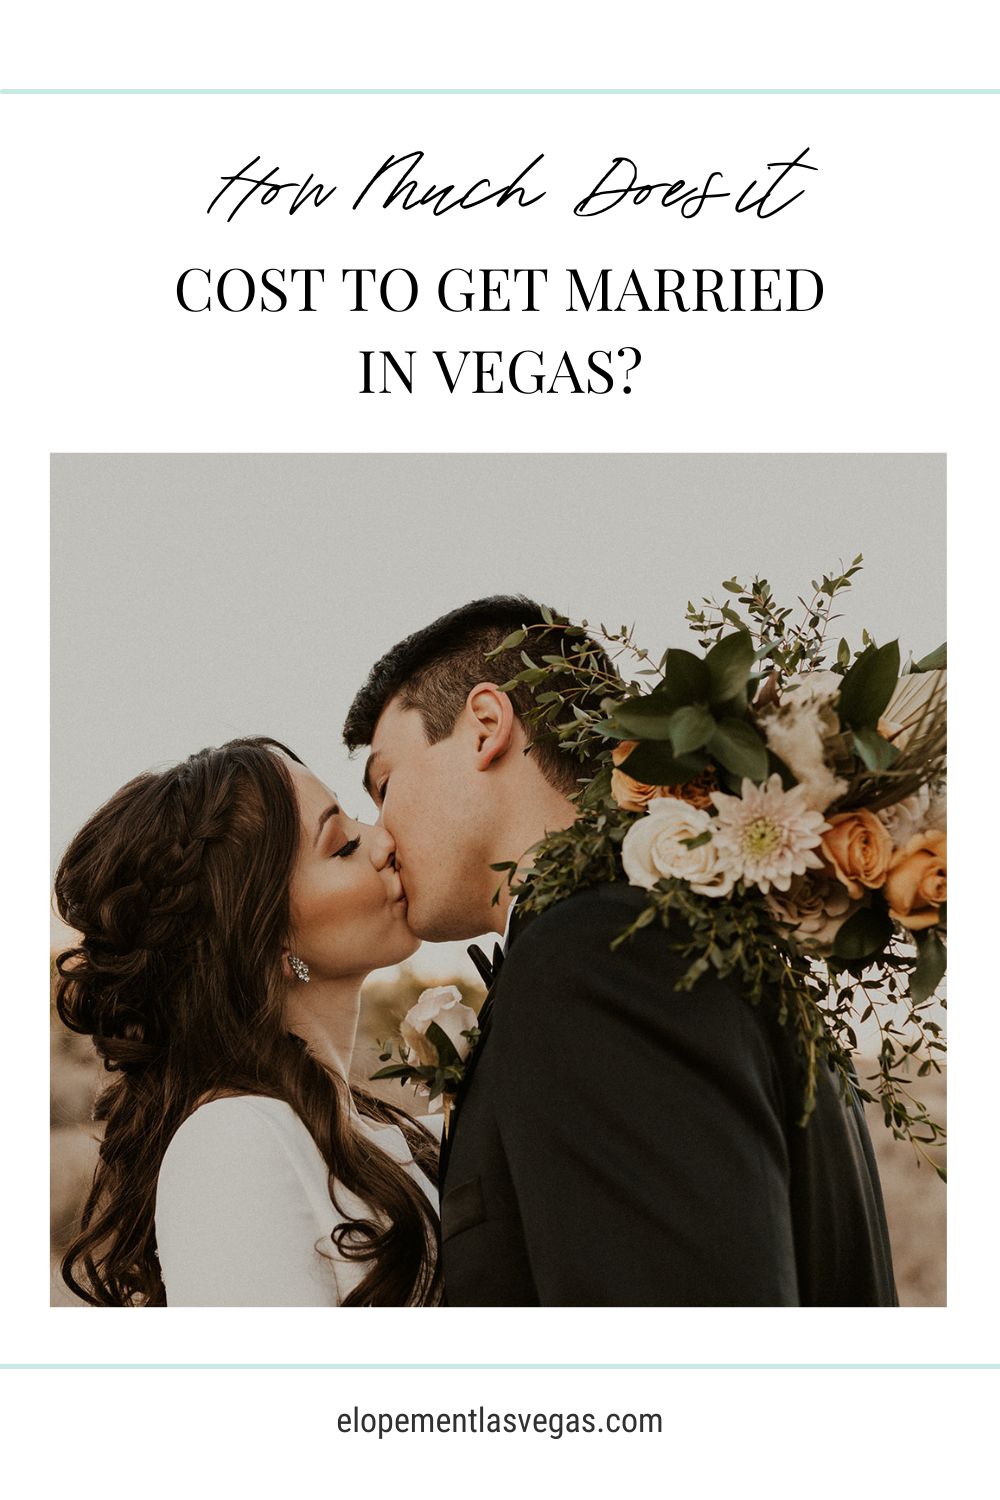 Bride and groom sharing a kiss during their Las Vegas wedding shoot; image overlaid with text that reads How Much Does it Cost to Get Married in Vegas?